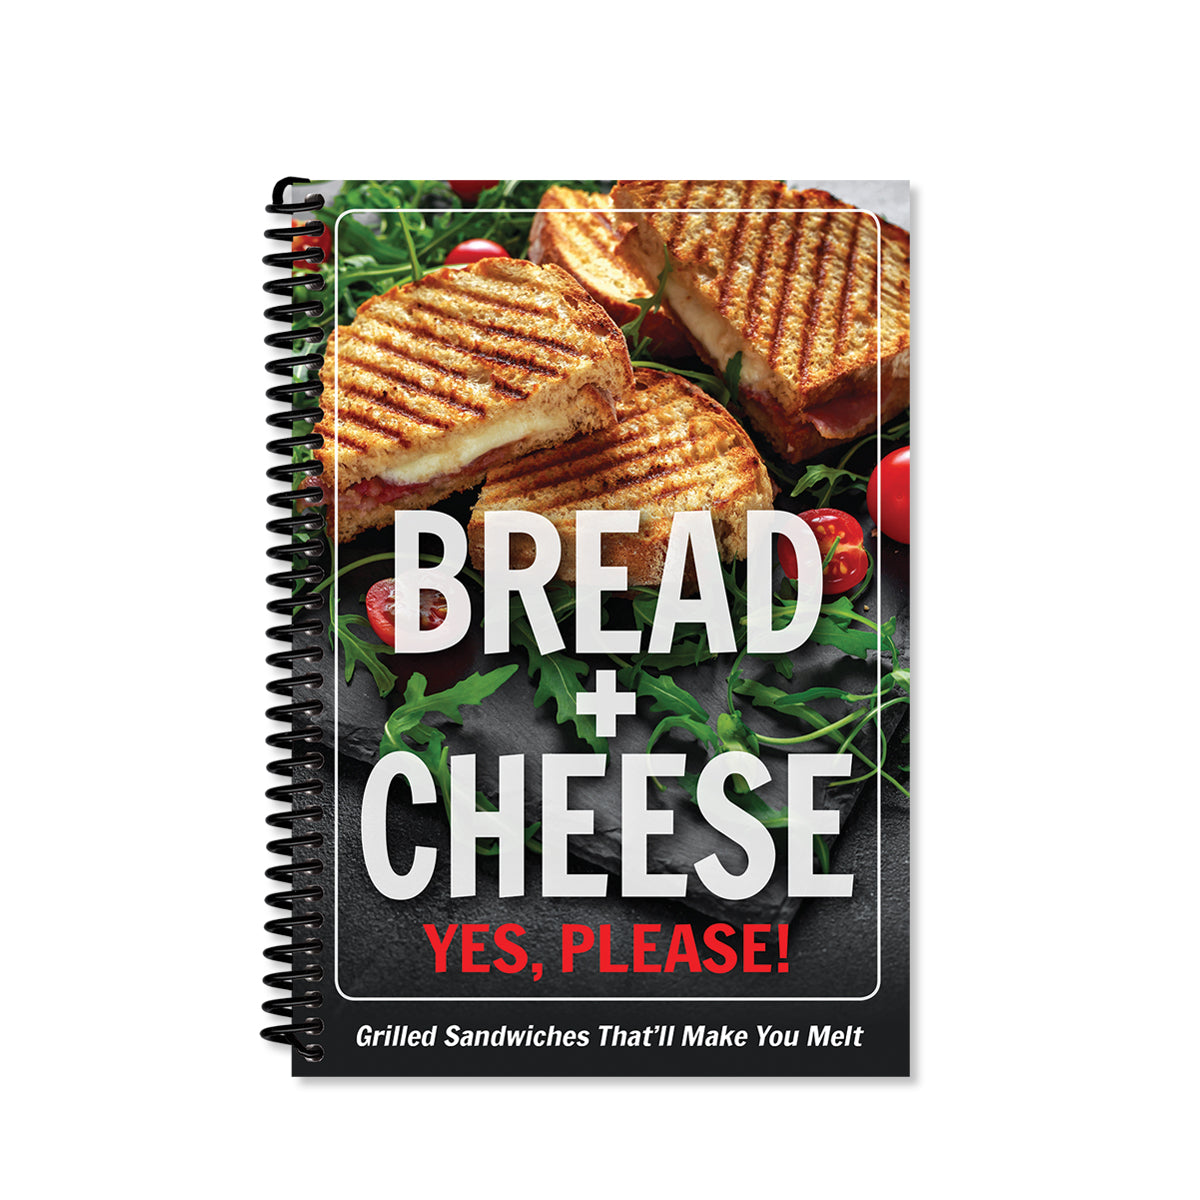 Cover of cookbook Bread + Cheese Yes, Please! - Grilled sandwiches that'll make you melt. Cover shows a grilled panini.